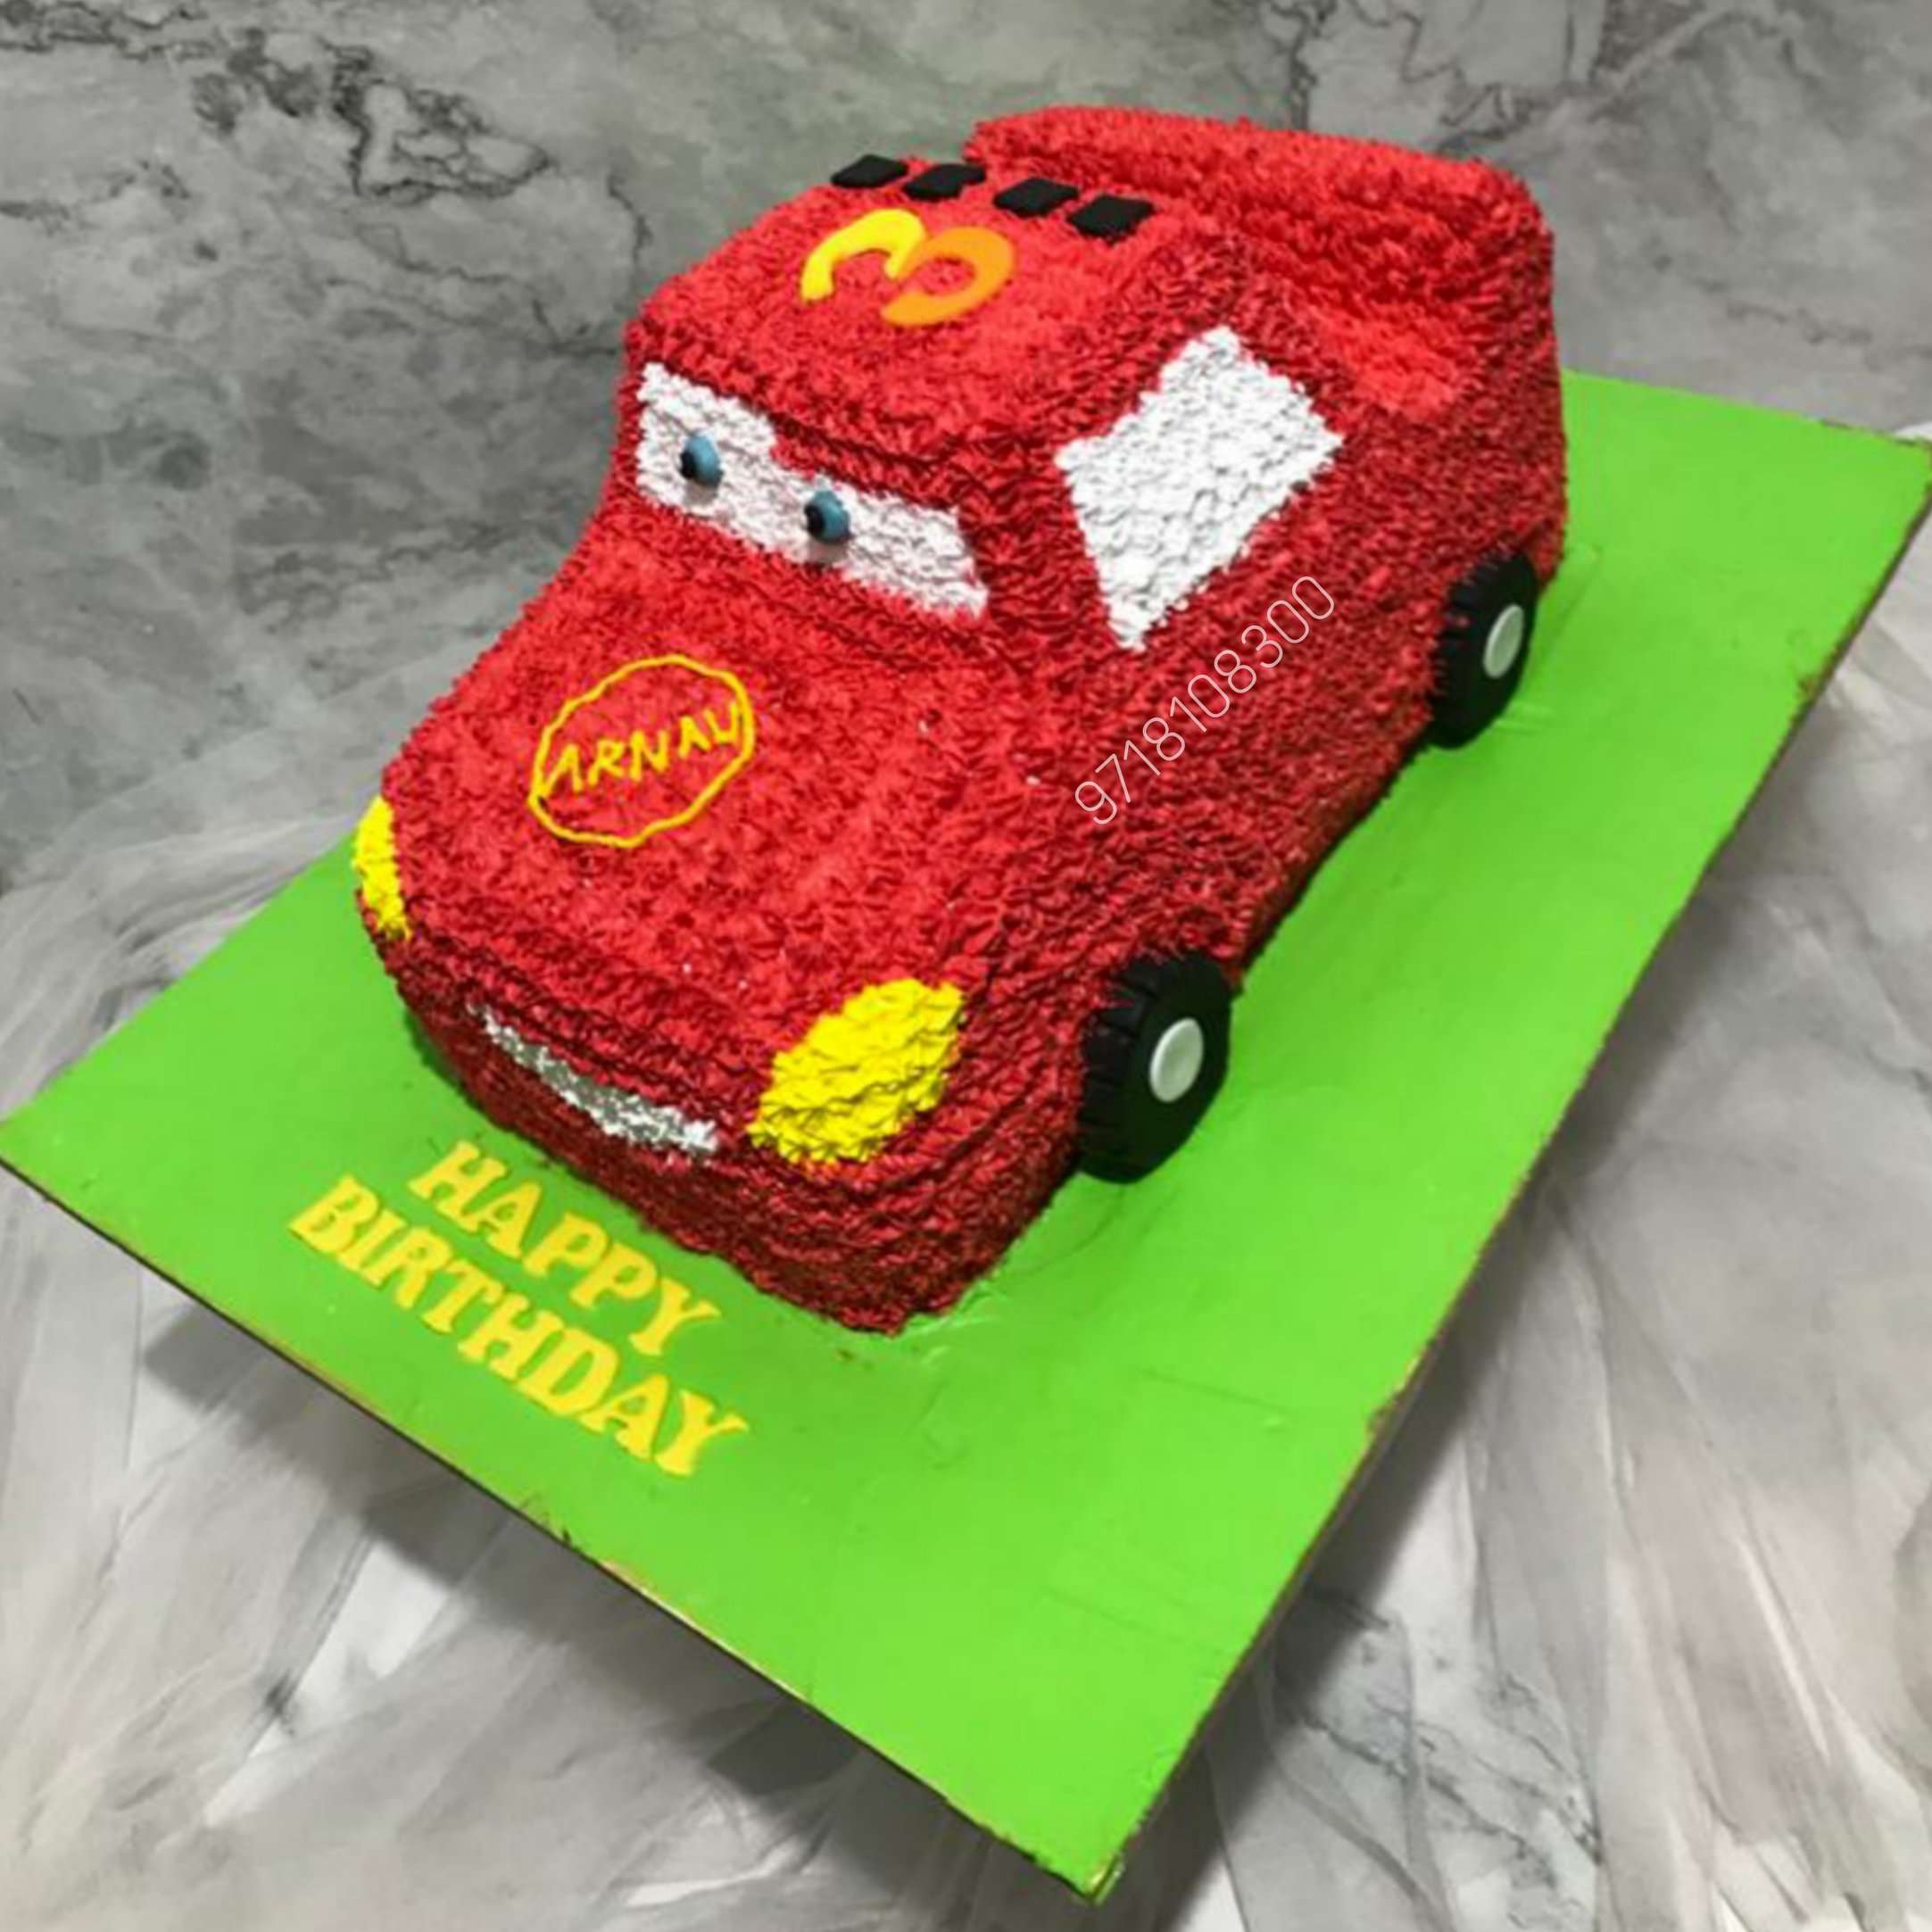 The Tyre Car Cake – Crave by Leena